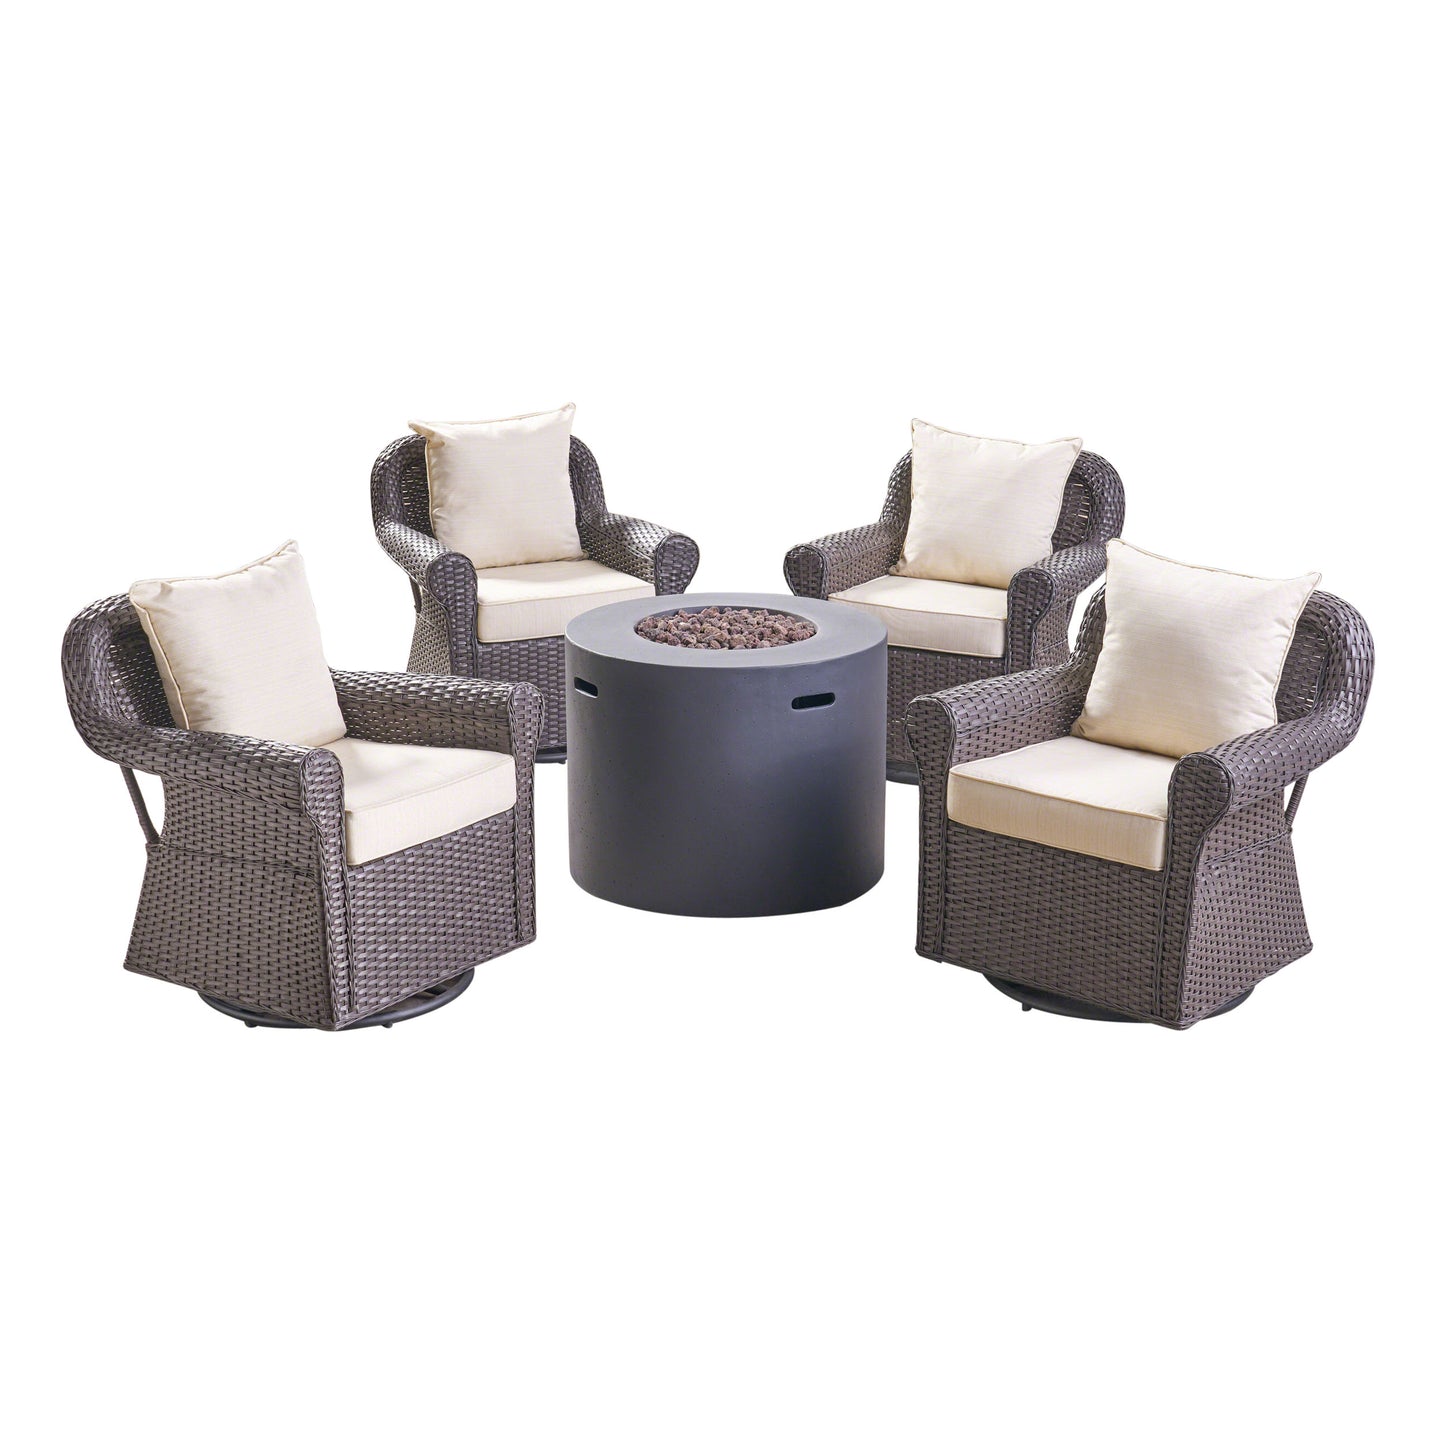 Harding Outdoor 4 Piece Swivel Club Chair Set with Round Fire Pit